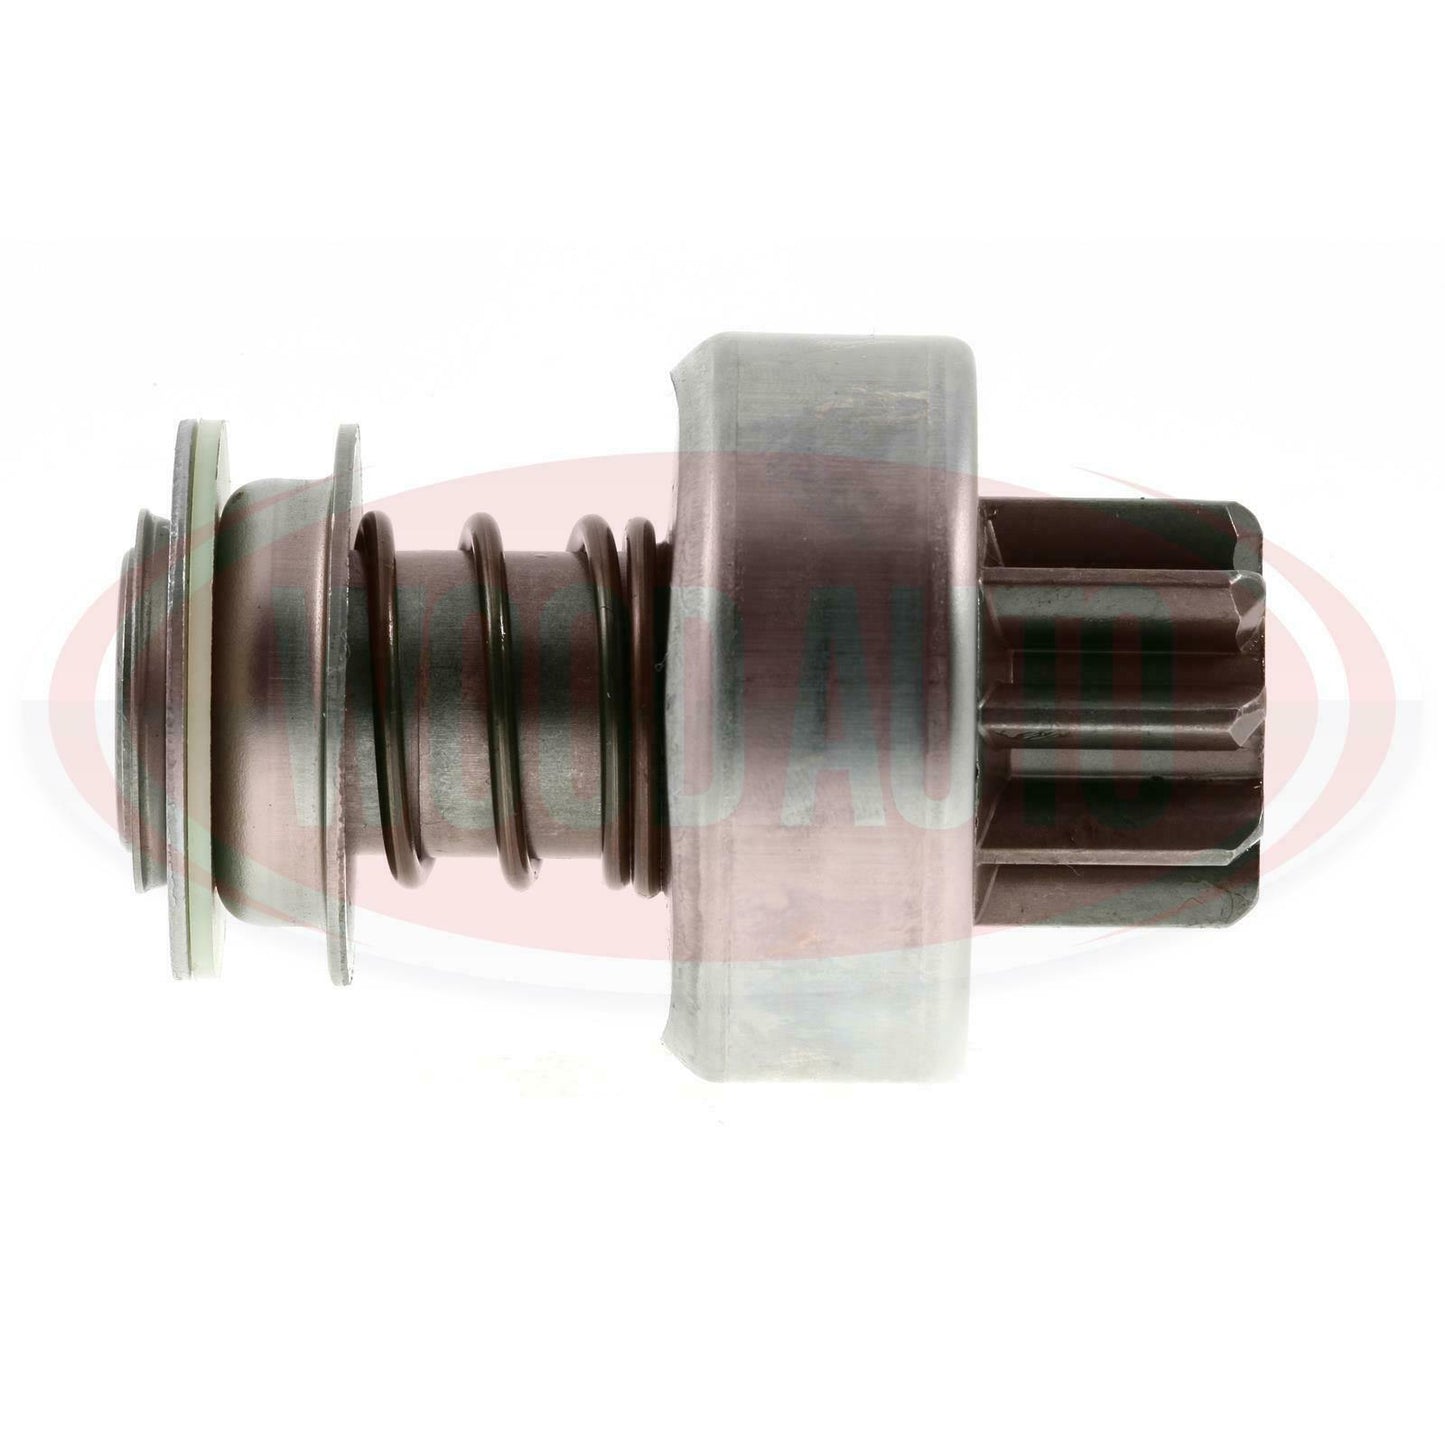 Starter Drive Pinion Bosch Type Fits Ford Fiat Mercedes Iveco Wood Auto Sdv3889 - Mid-Ulster Rotating Electrics Ltd